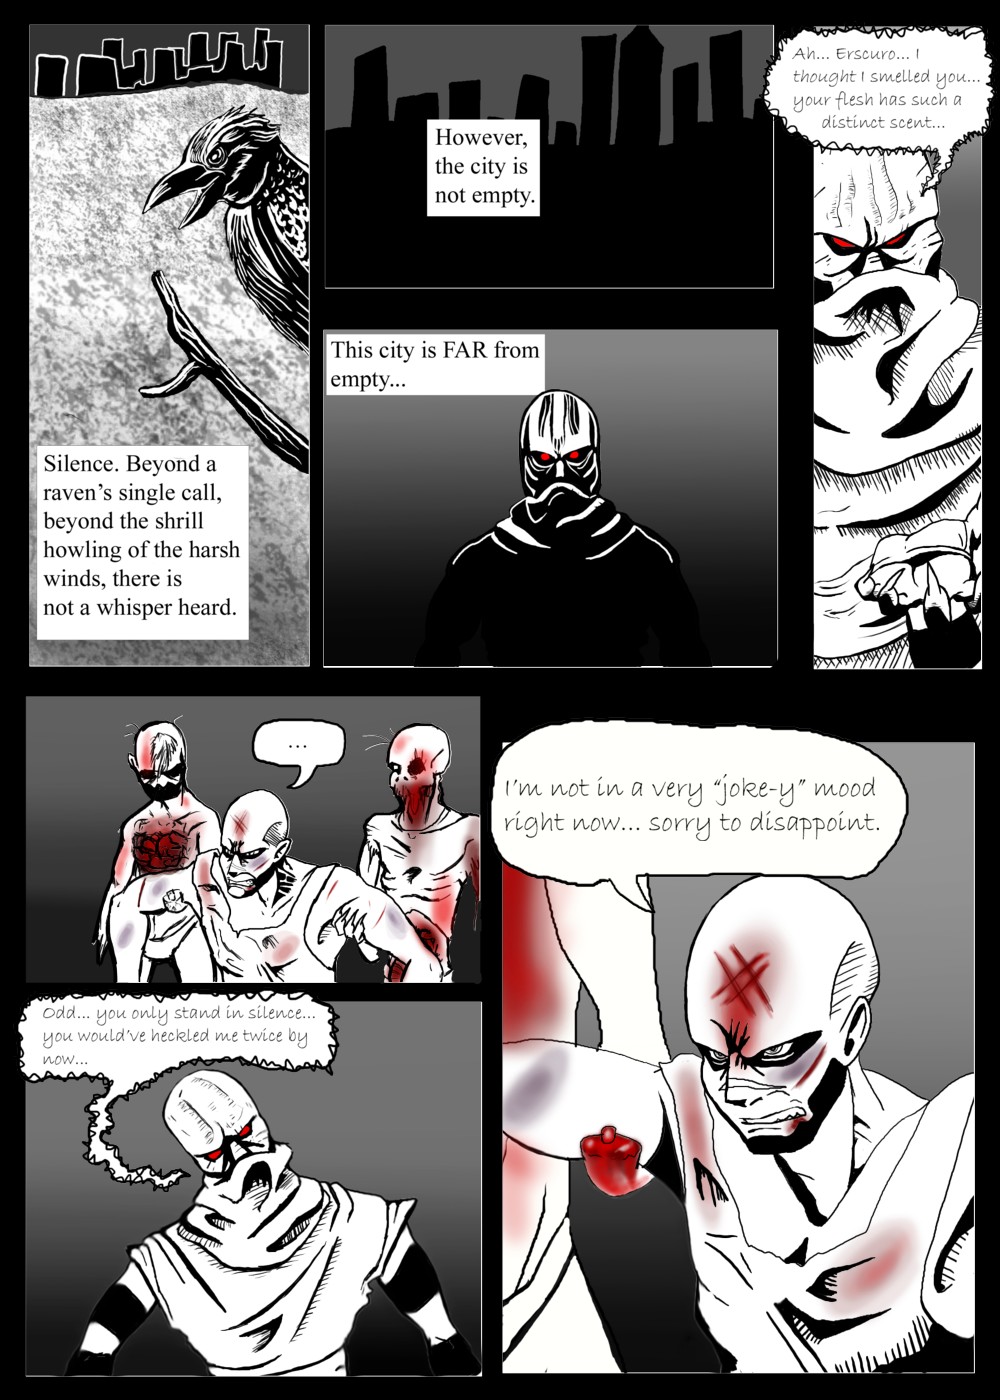 Erscuro Test Comic 1 by TheGameArtCritic